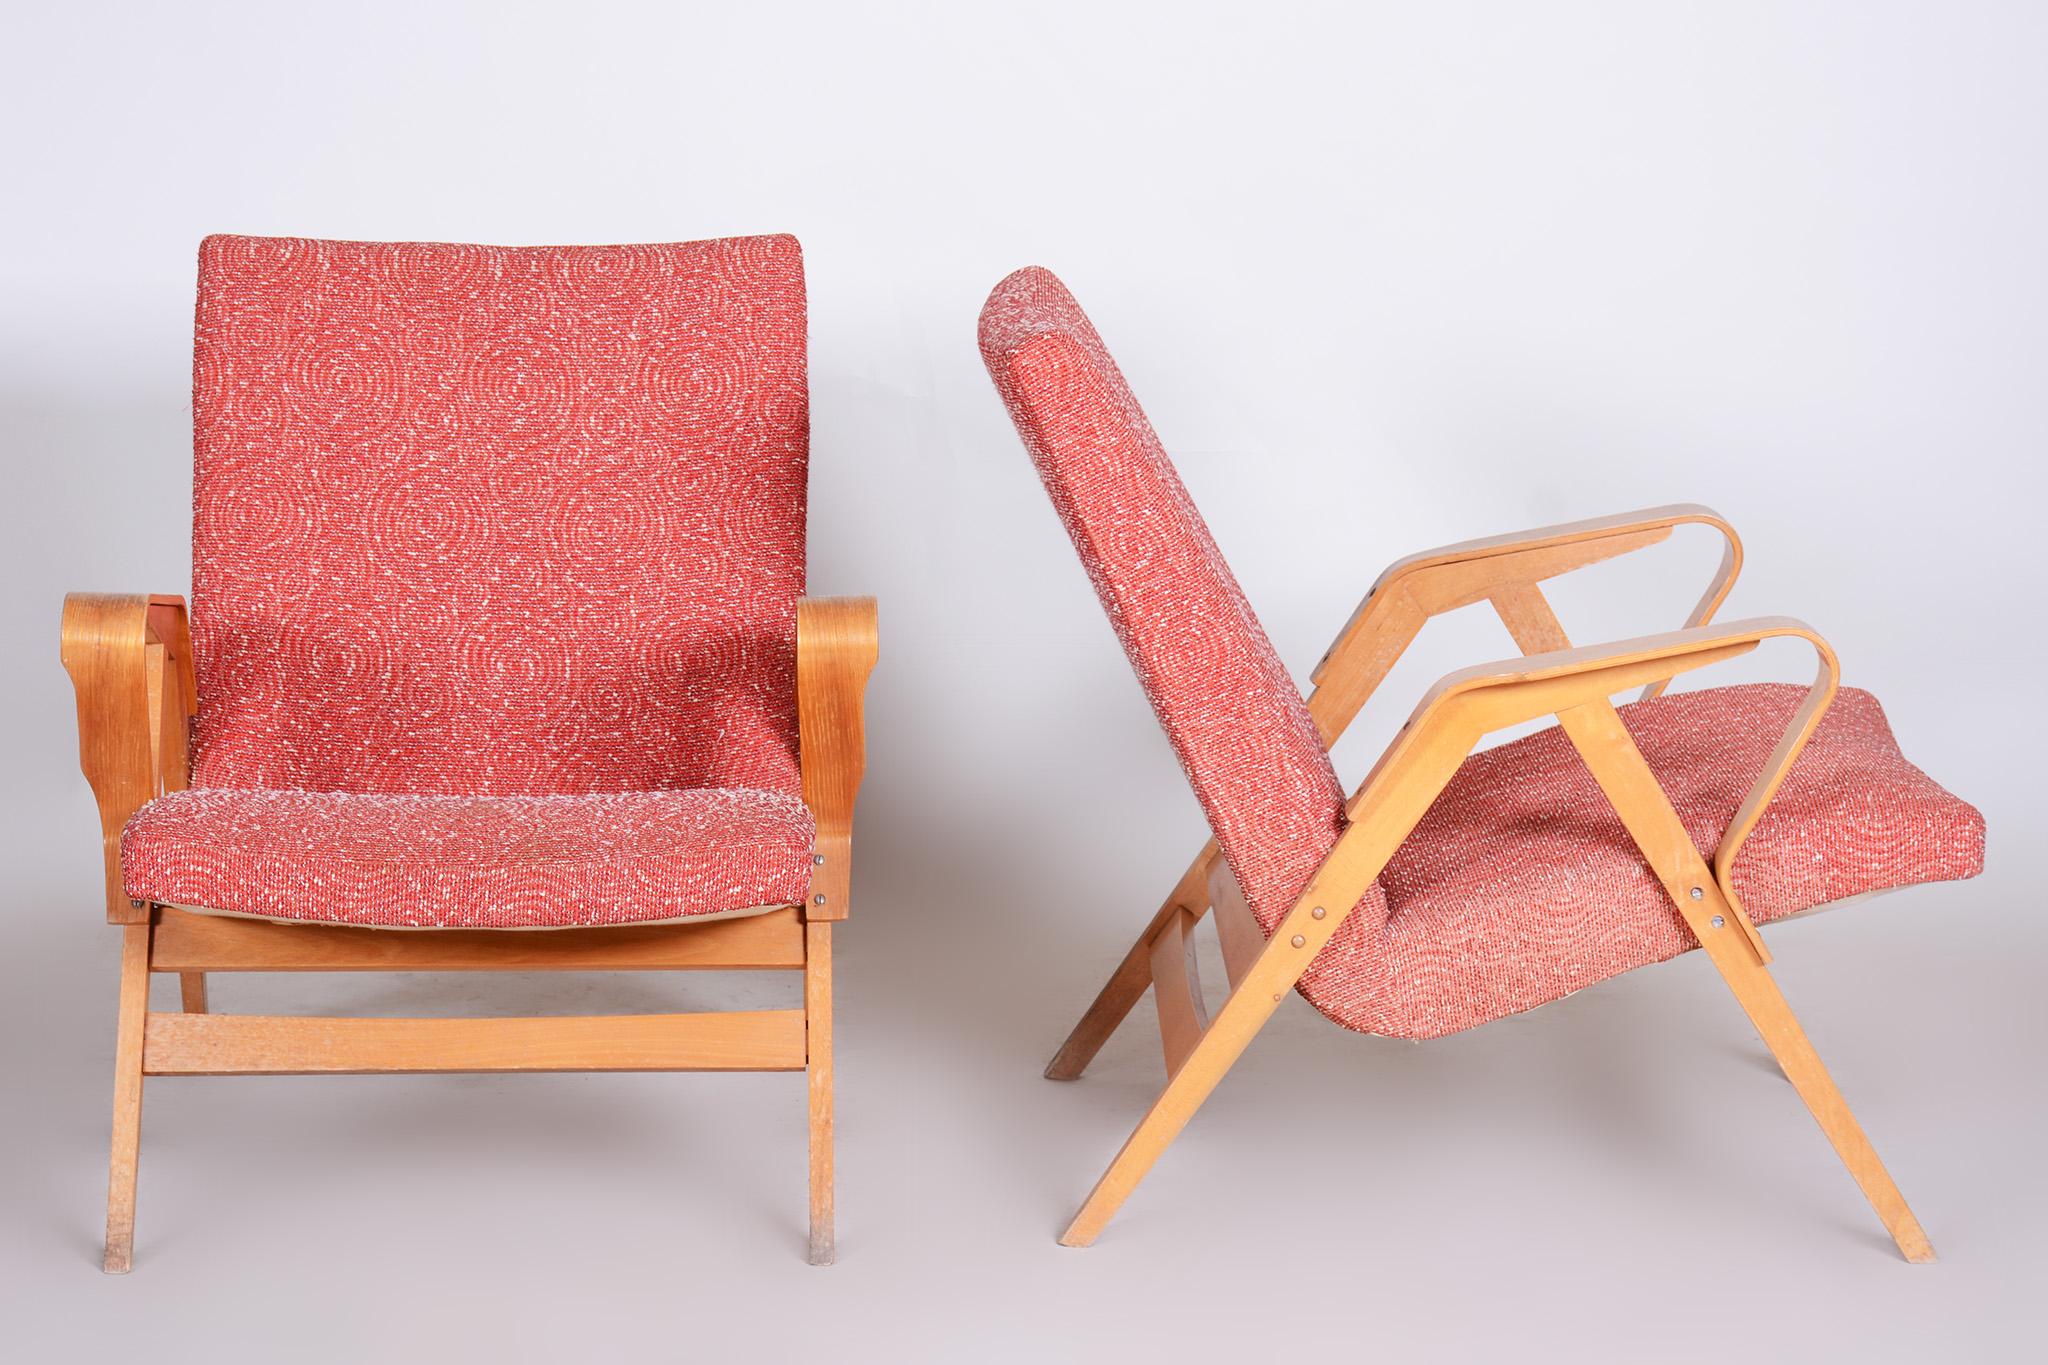 Pair of Salmon Midcentury Armchairs, Made by Tatra Pravenec, 1950s Czechia In Good Condition For Sale In Horomerice, CZ